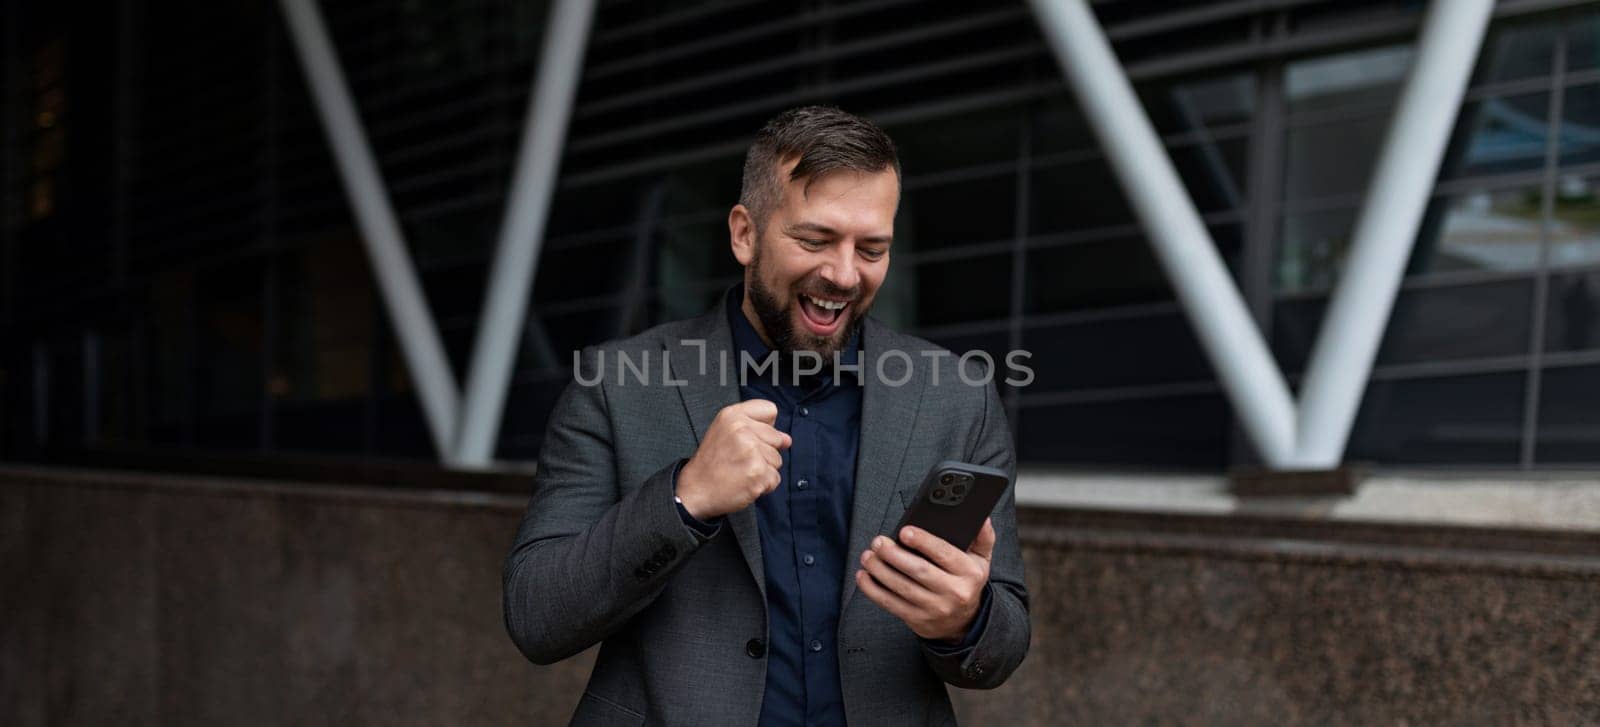 happy freelancer man with a smartphone in his hands smiling against the backdrop of the building.